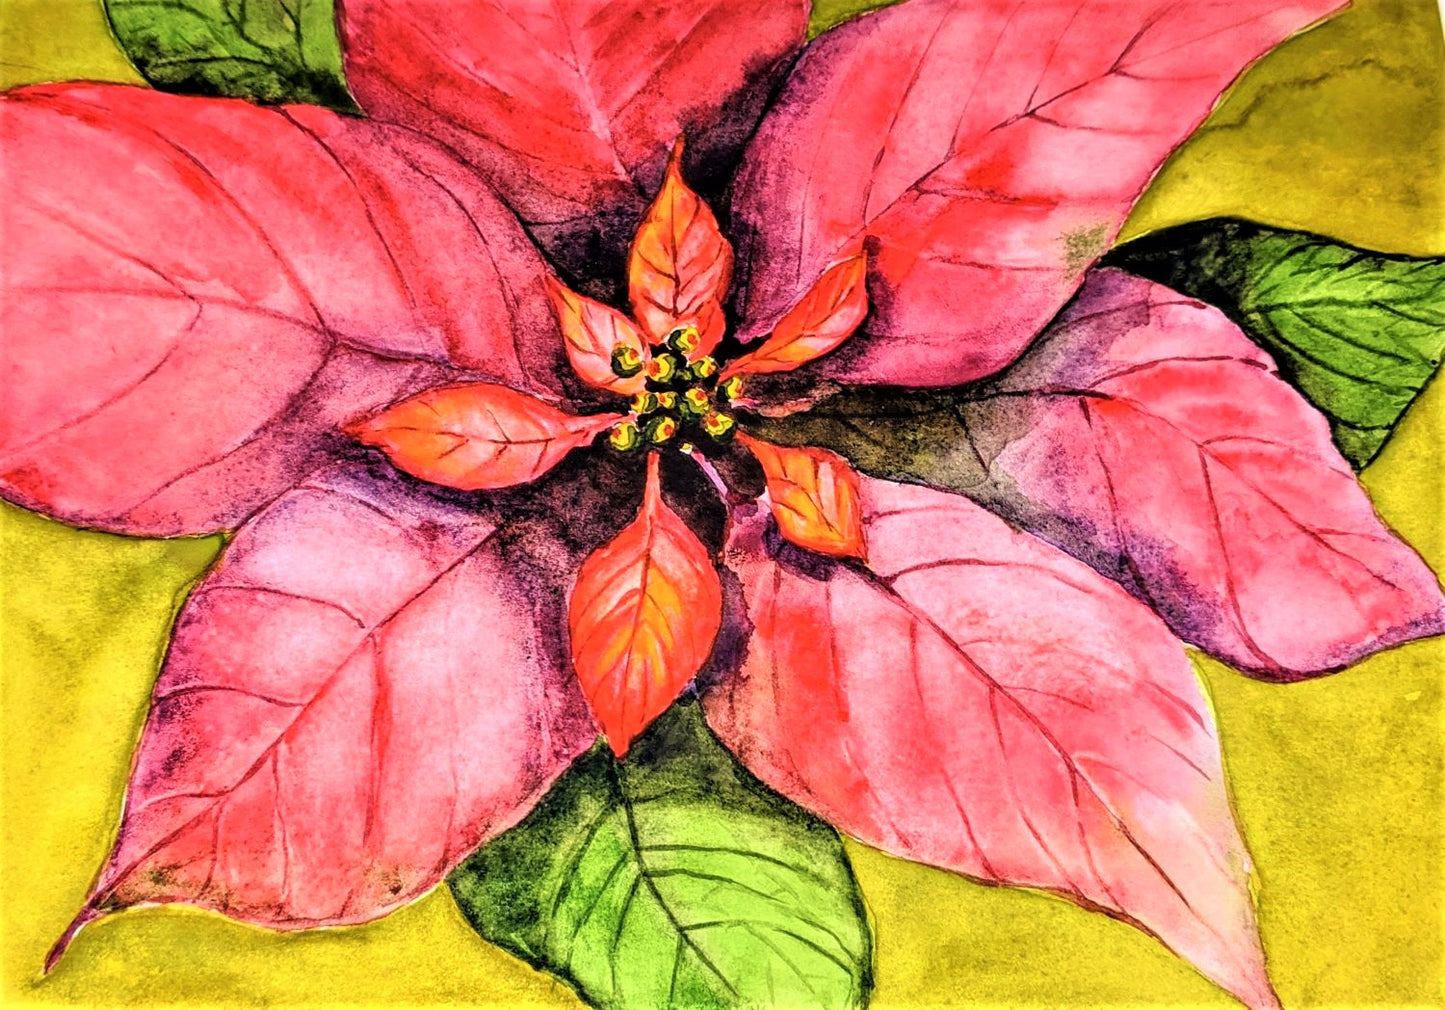 Glowing Poinsettia watercolor painting on paper